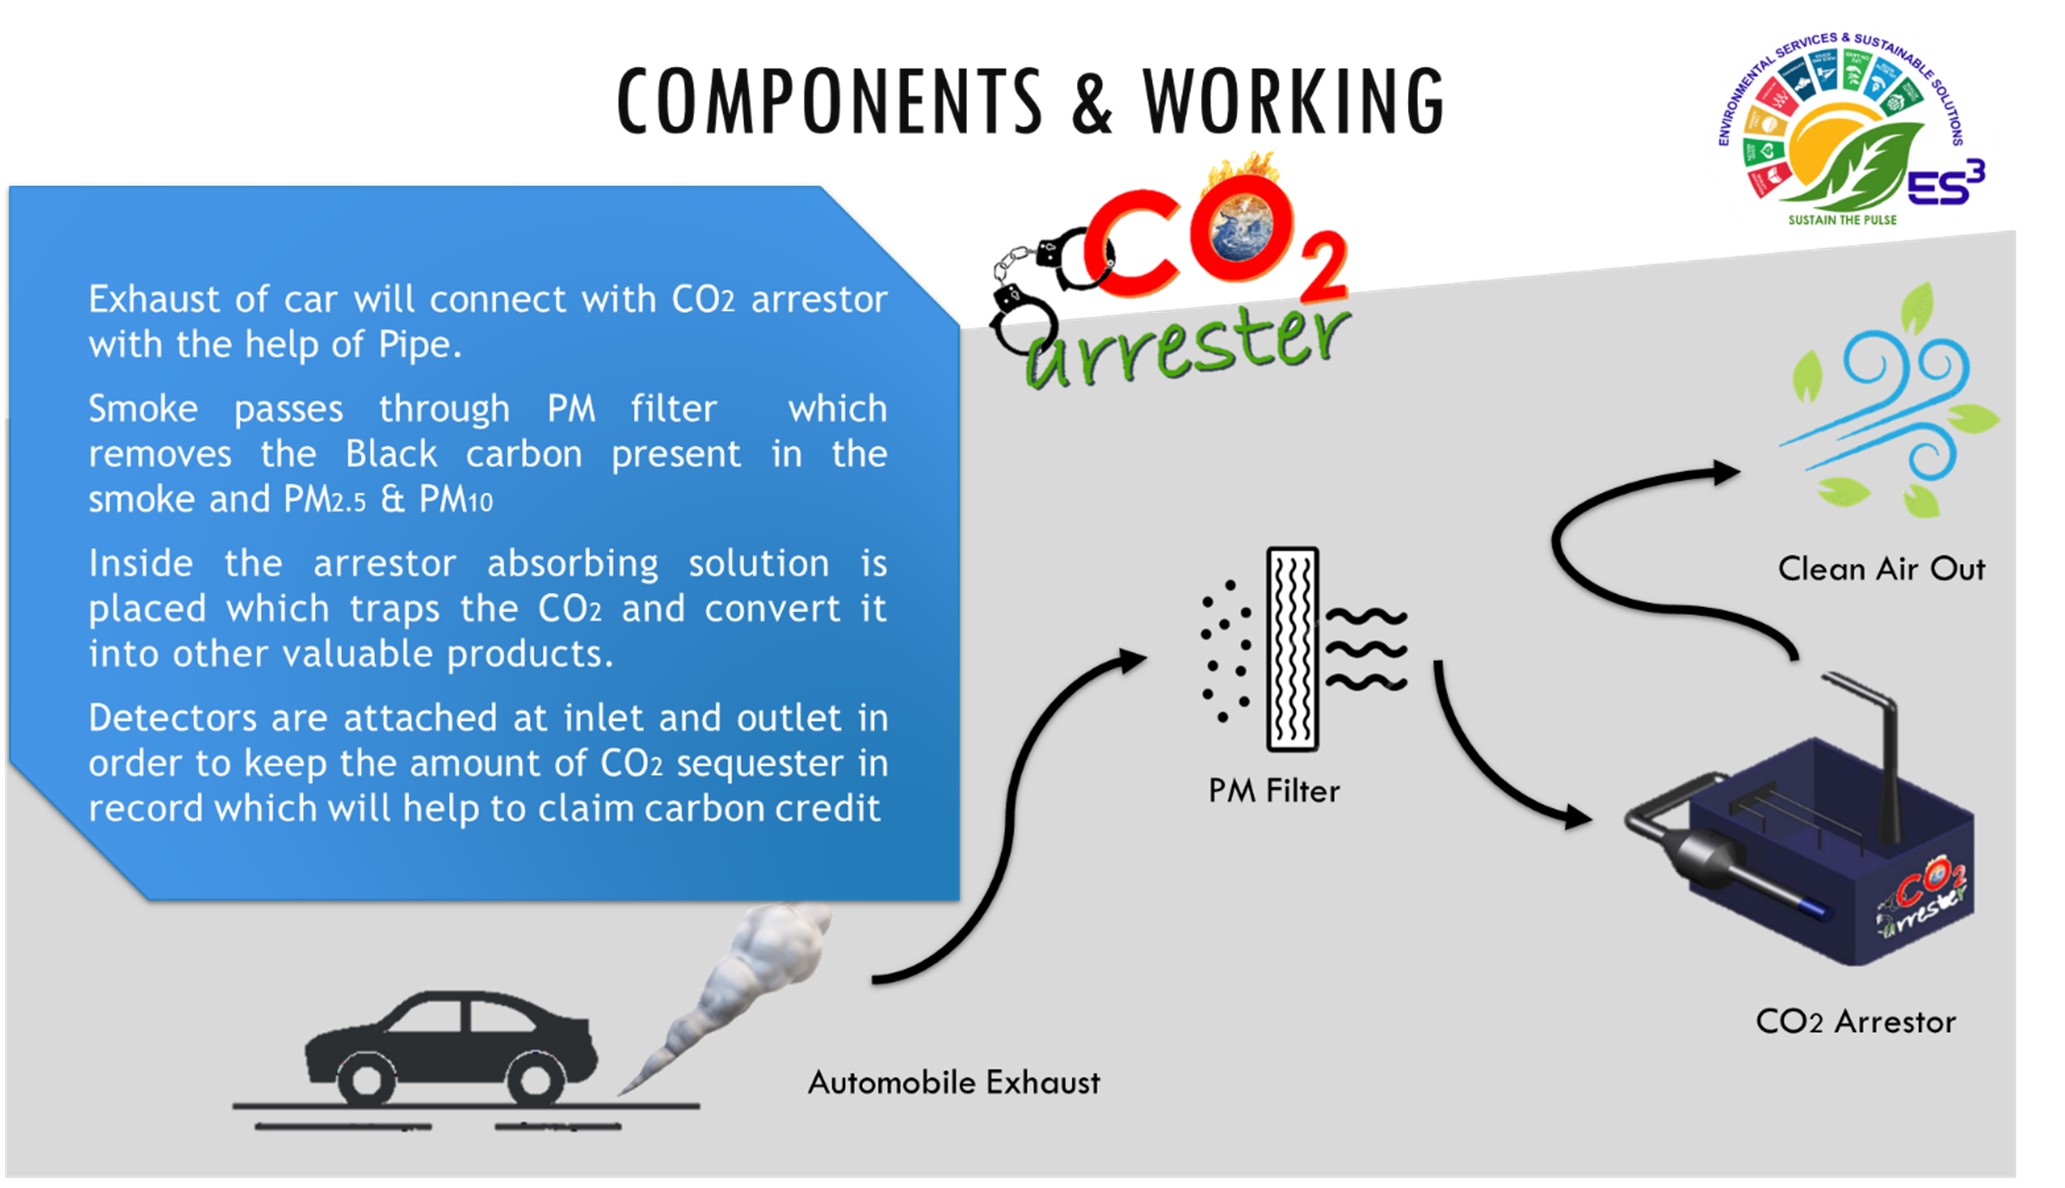 Figure 1: Schematic Diagram of CO2 Arrestor components and its functions